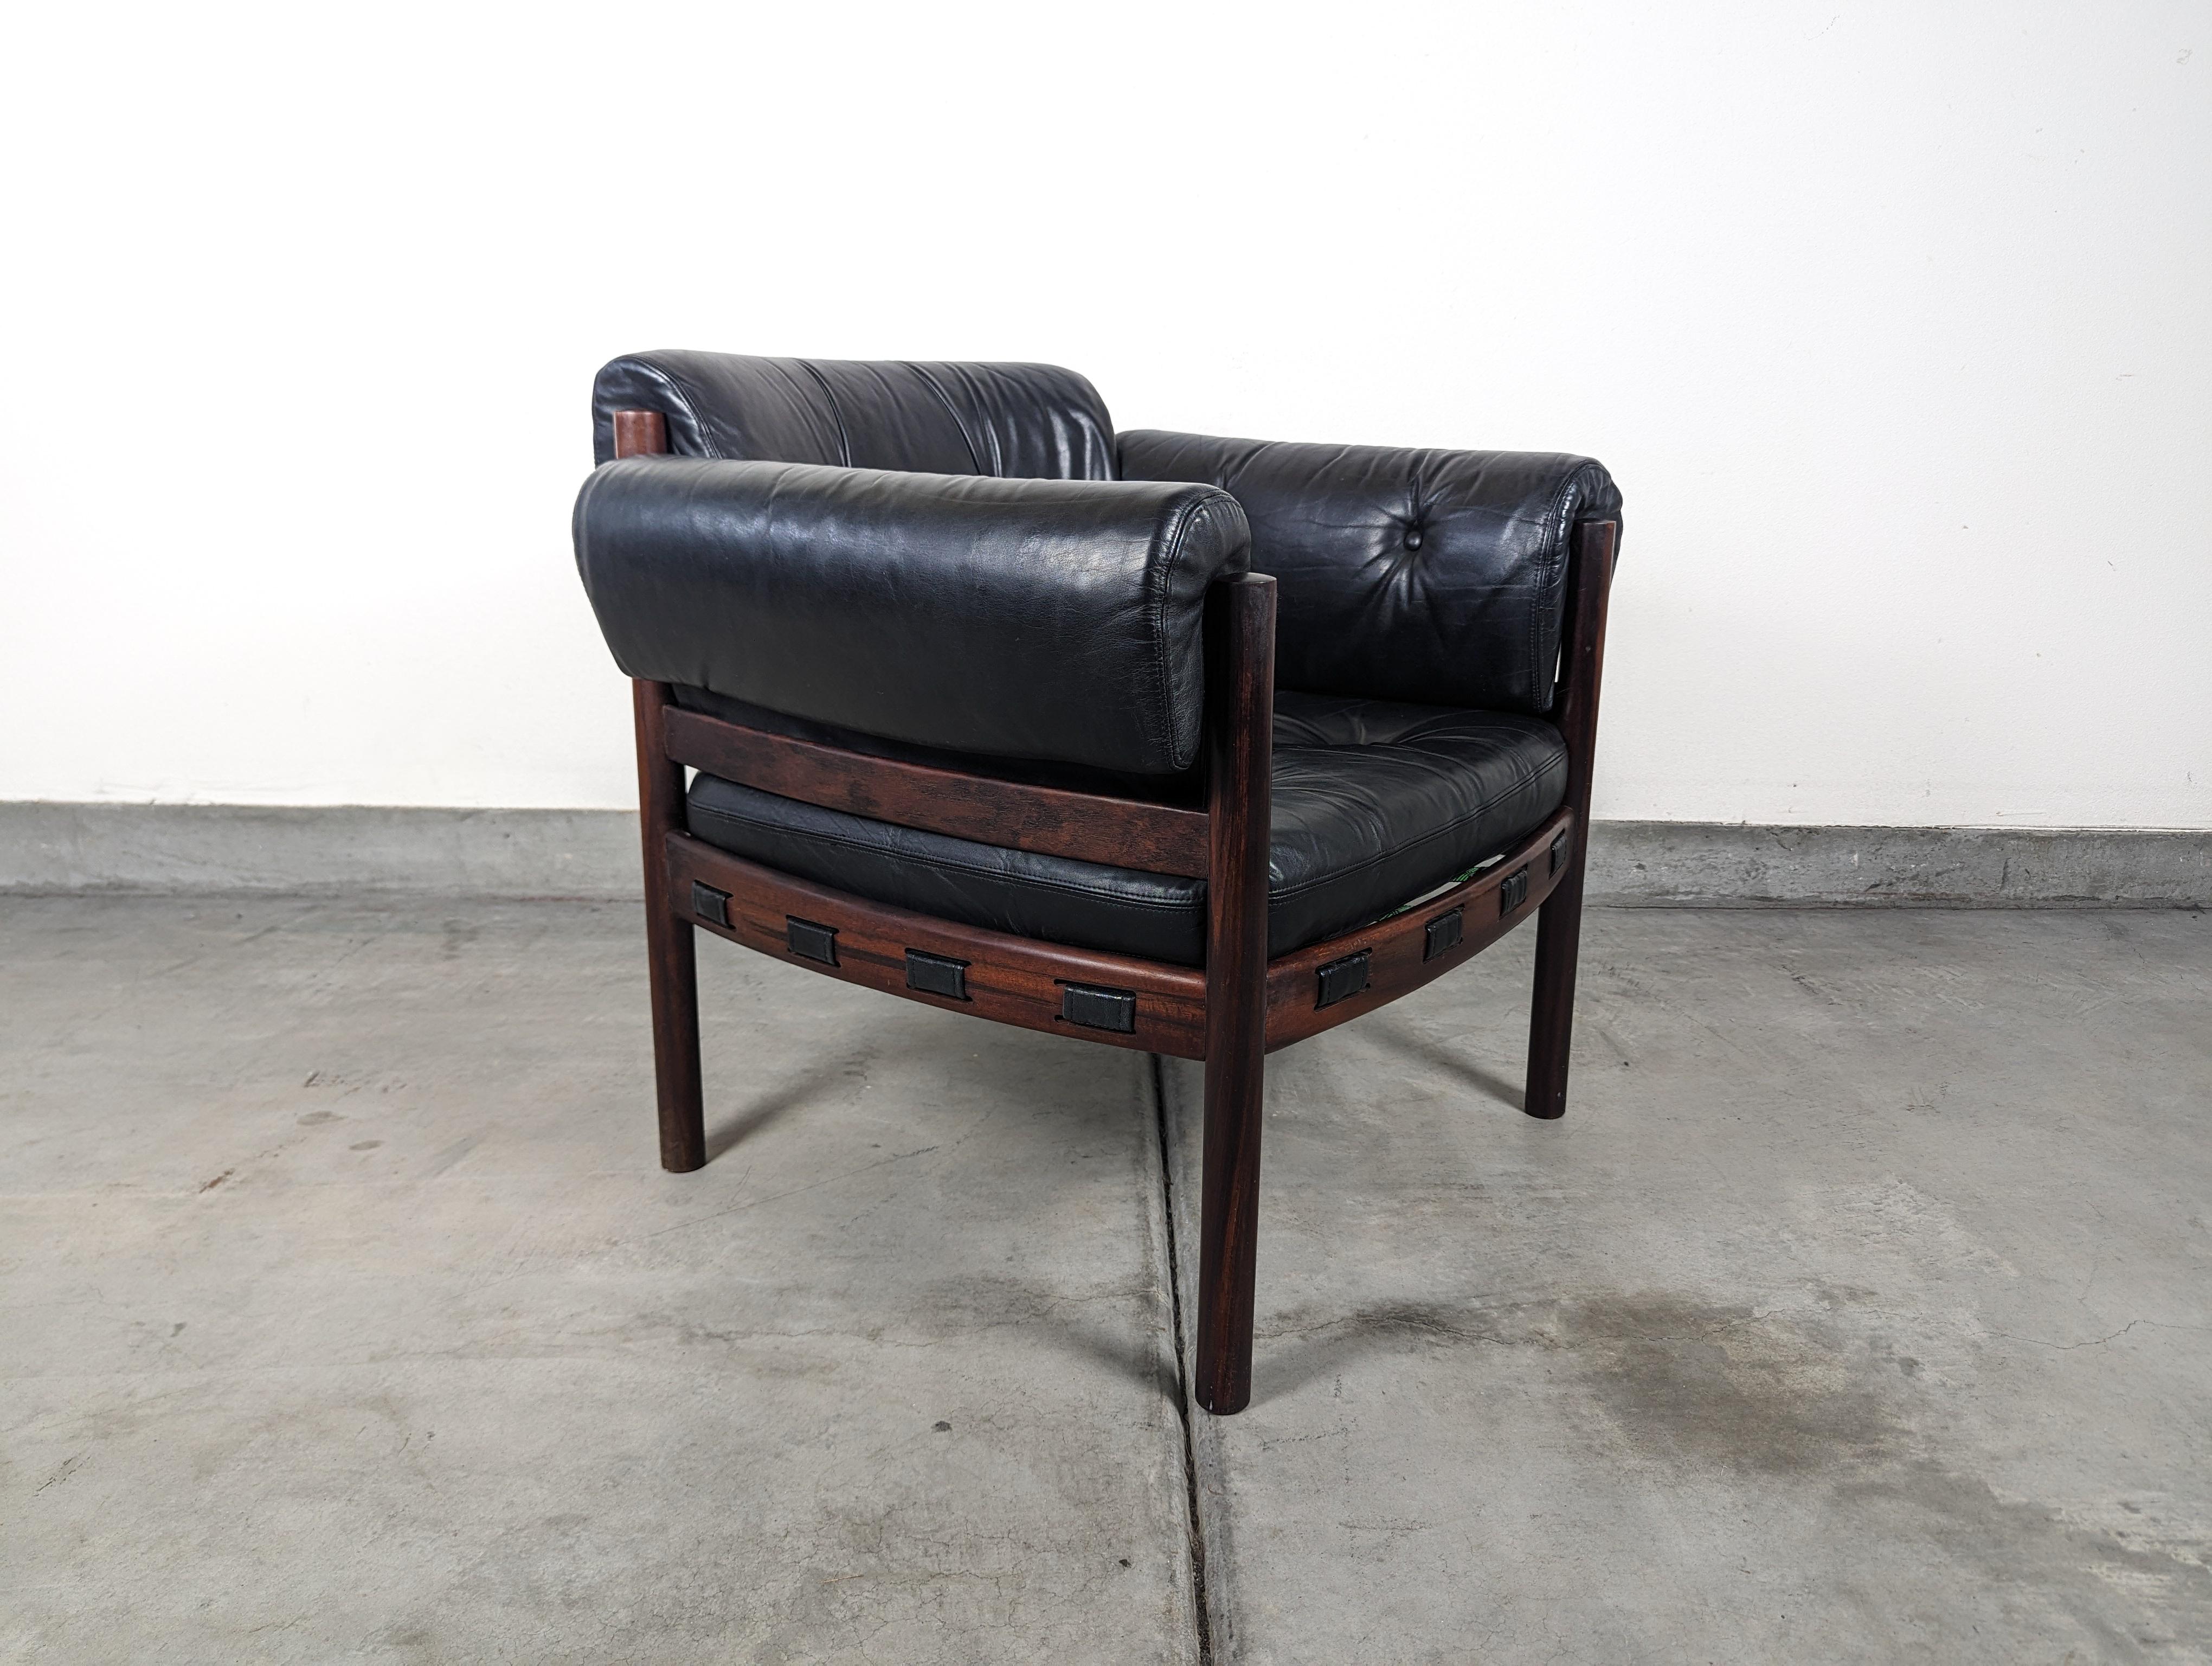 Presenting for sale, an iconic, rare, and highly sought-after mid-century modern armchair designed by the legendary Swedish designer, Arne Norell.

This particular version is fashioned from luxurious rosewood, a variant that is considerably rarer,